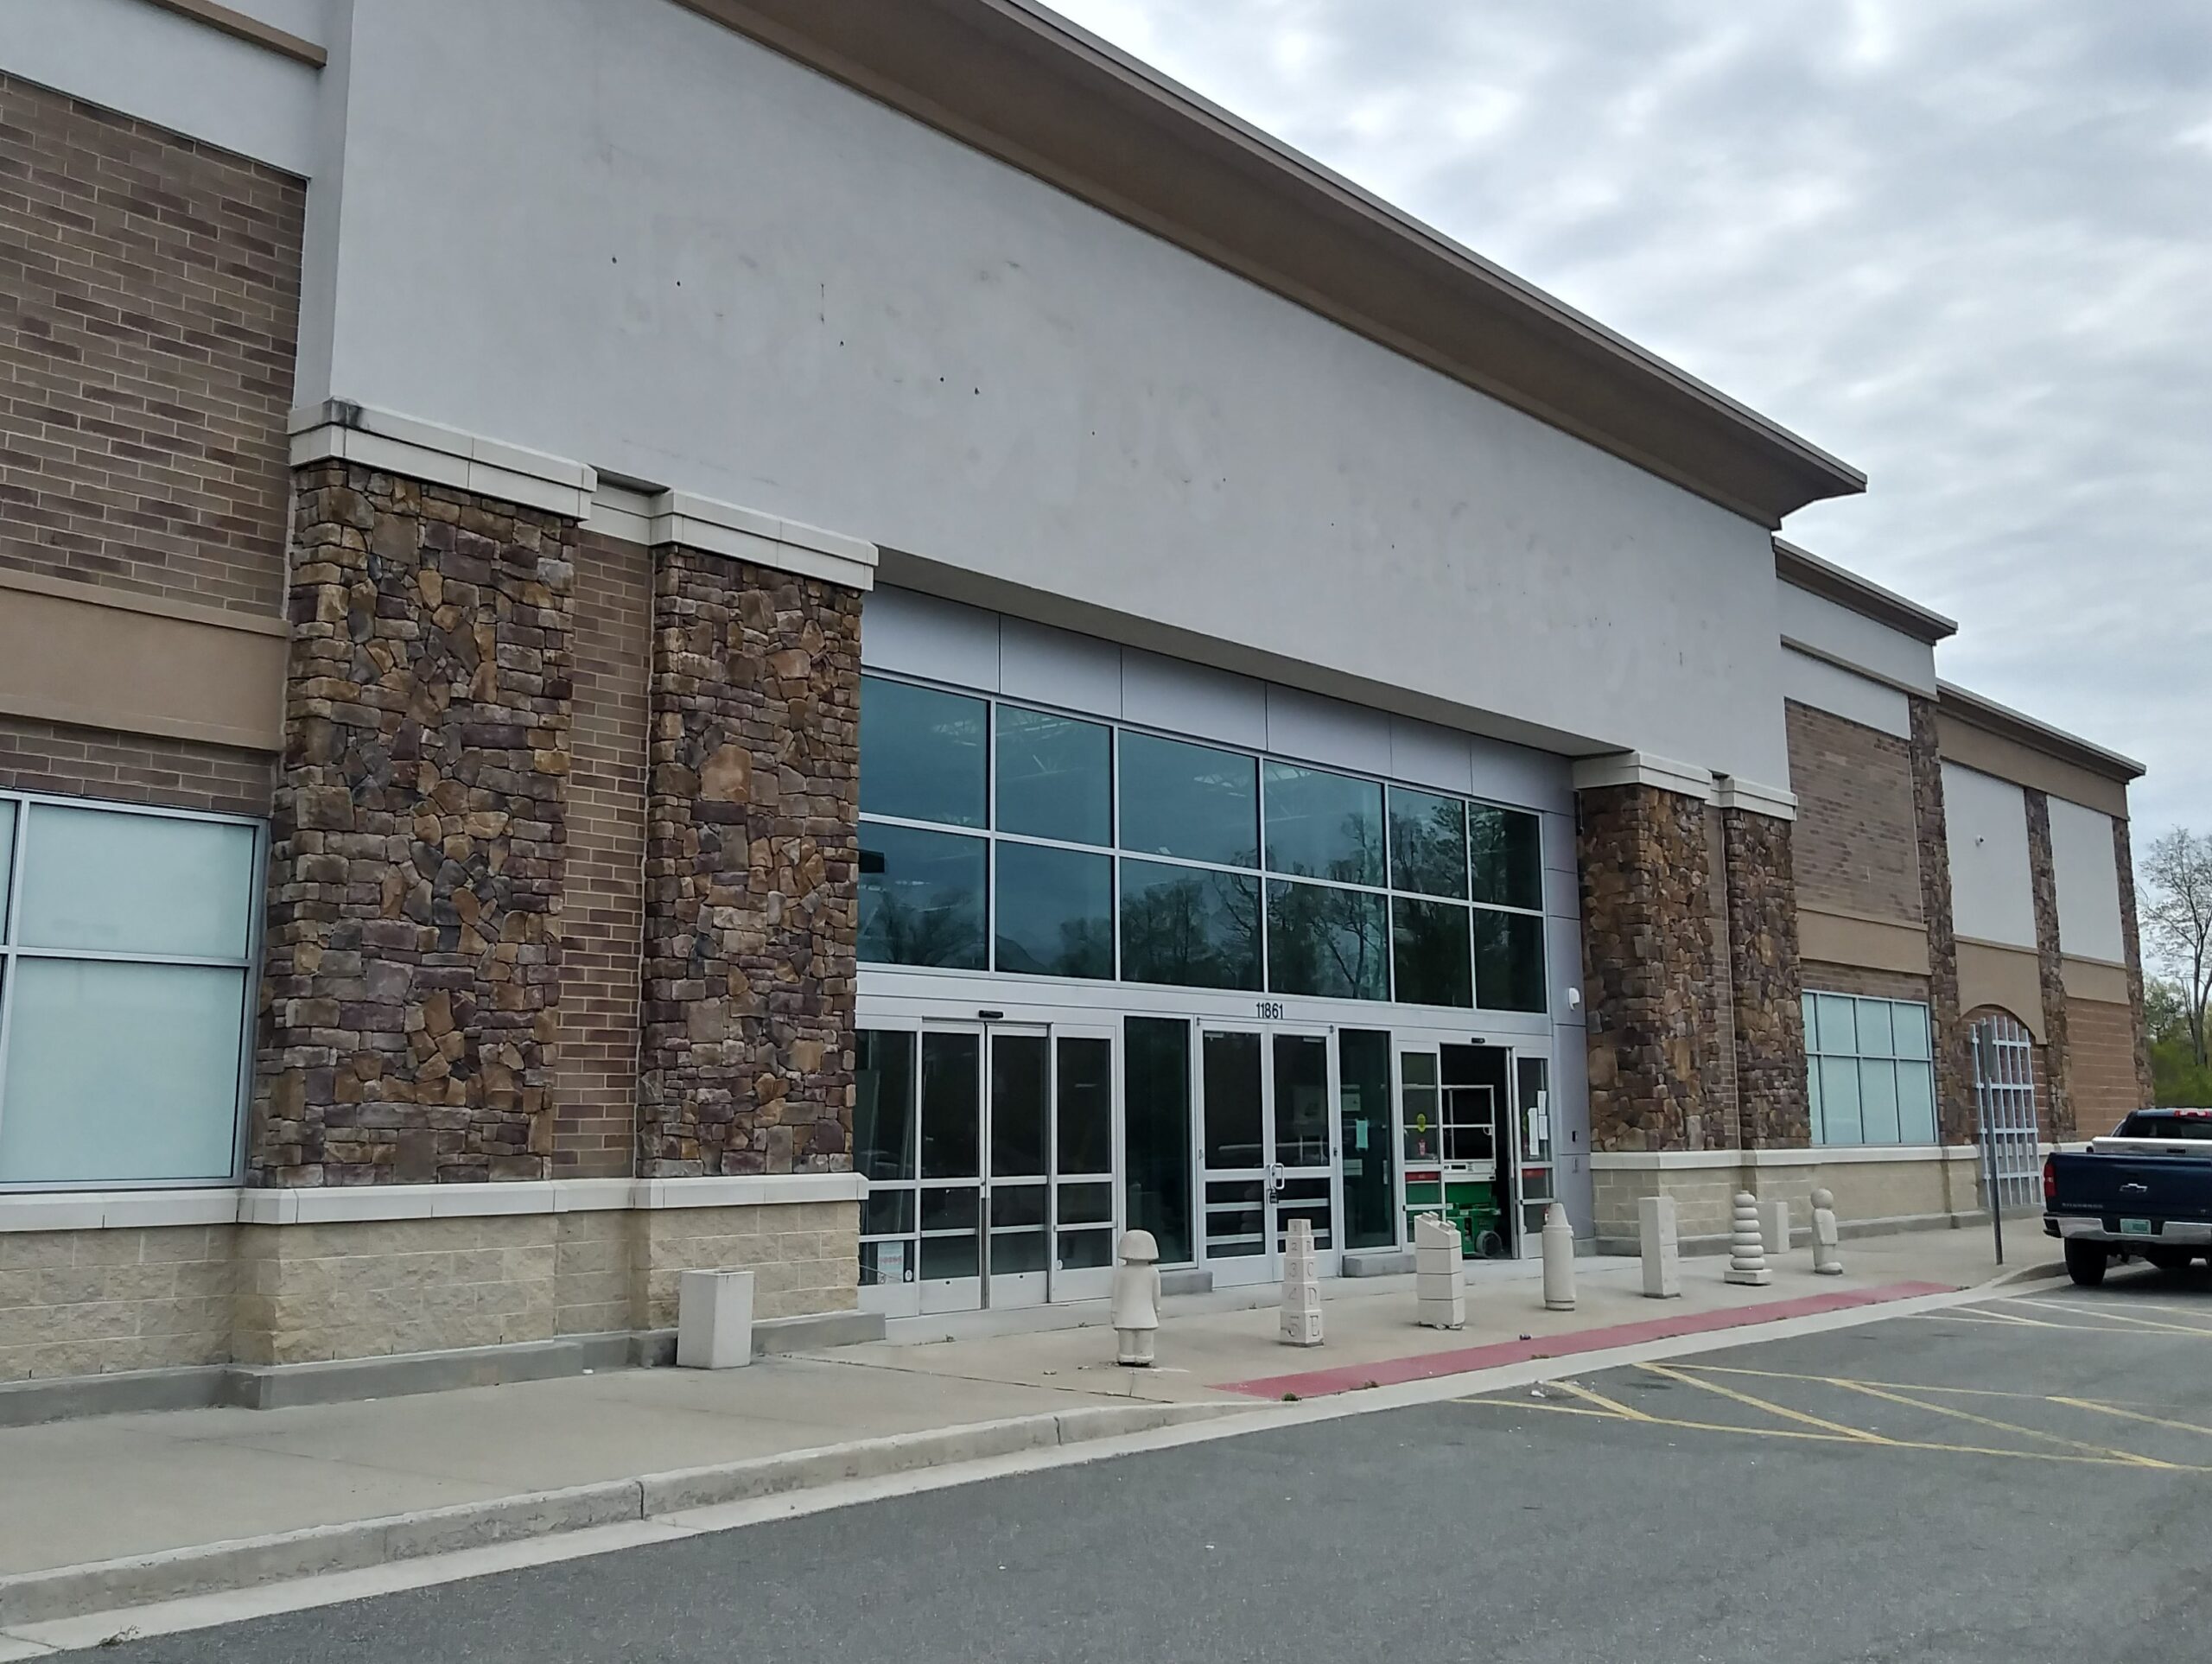 Sporting goods store leases former Toys ‘R’ Us space in Short Pump